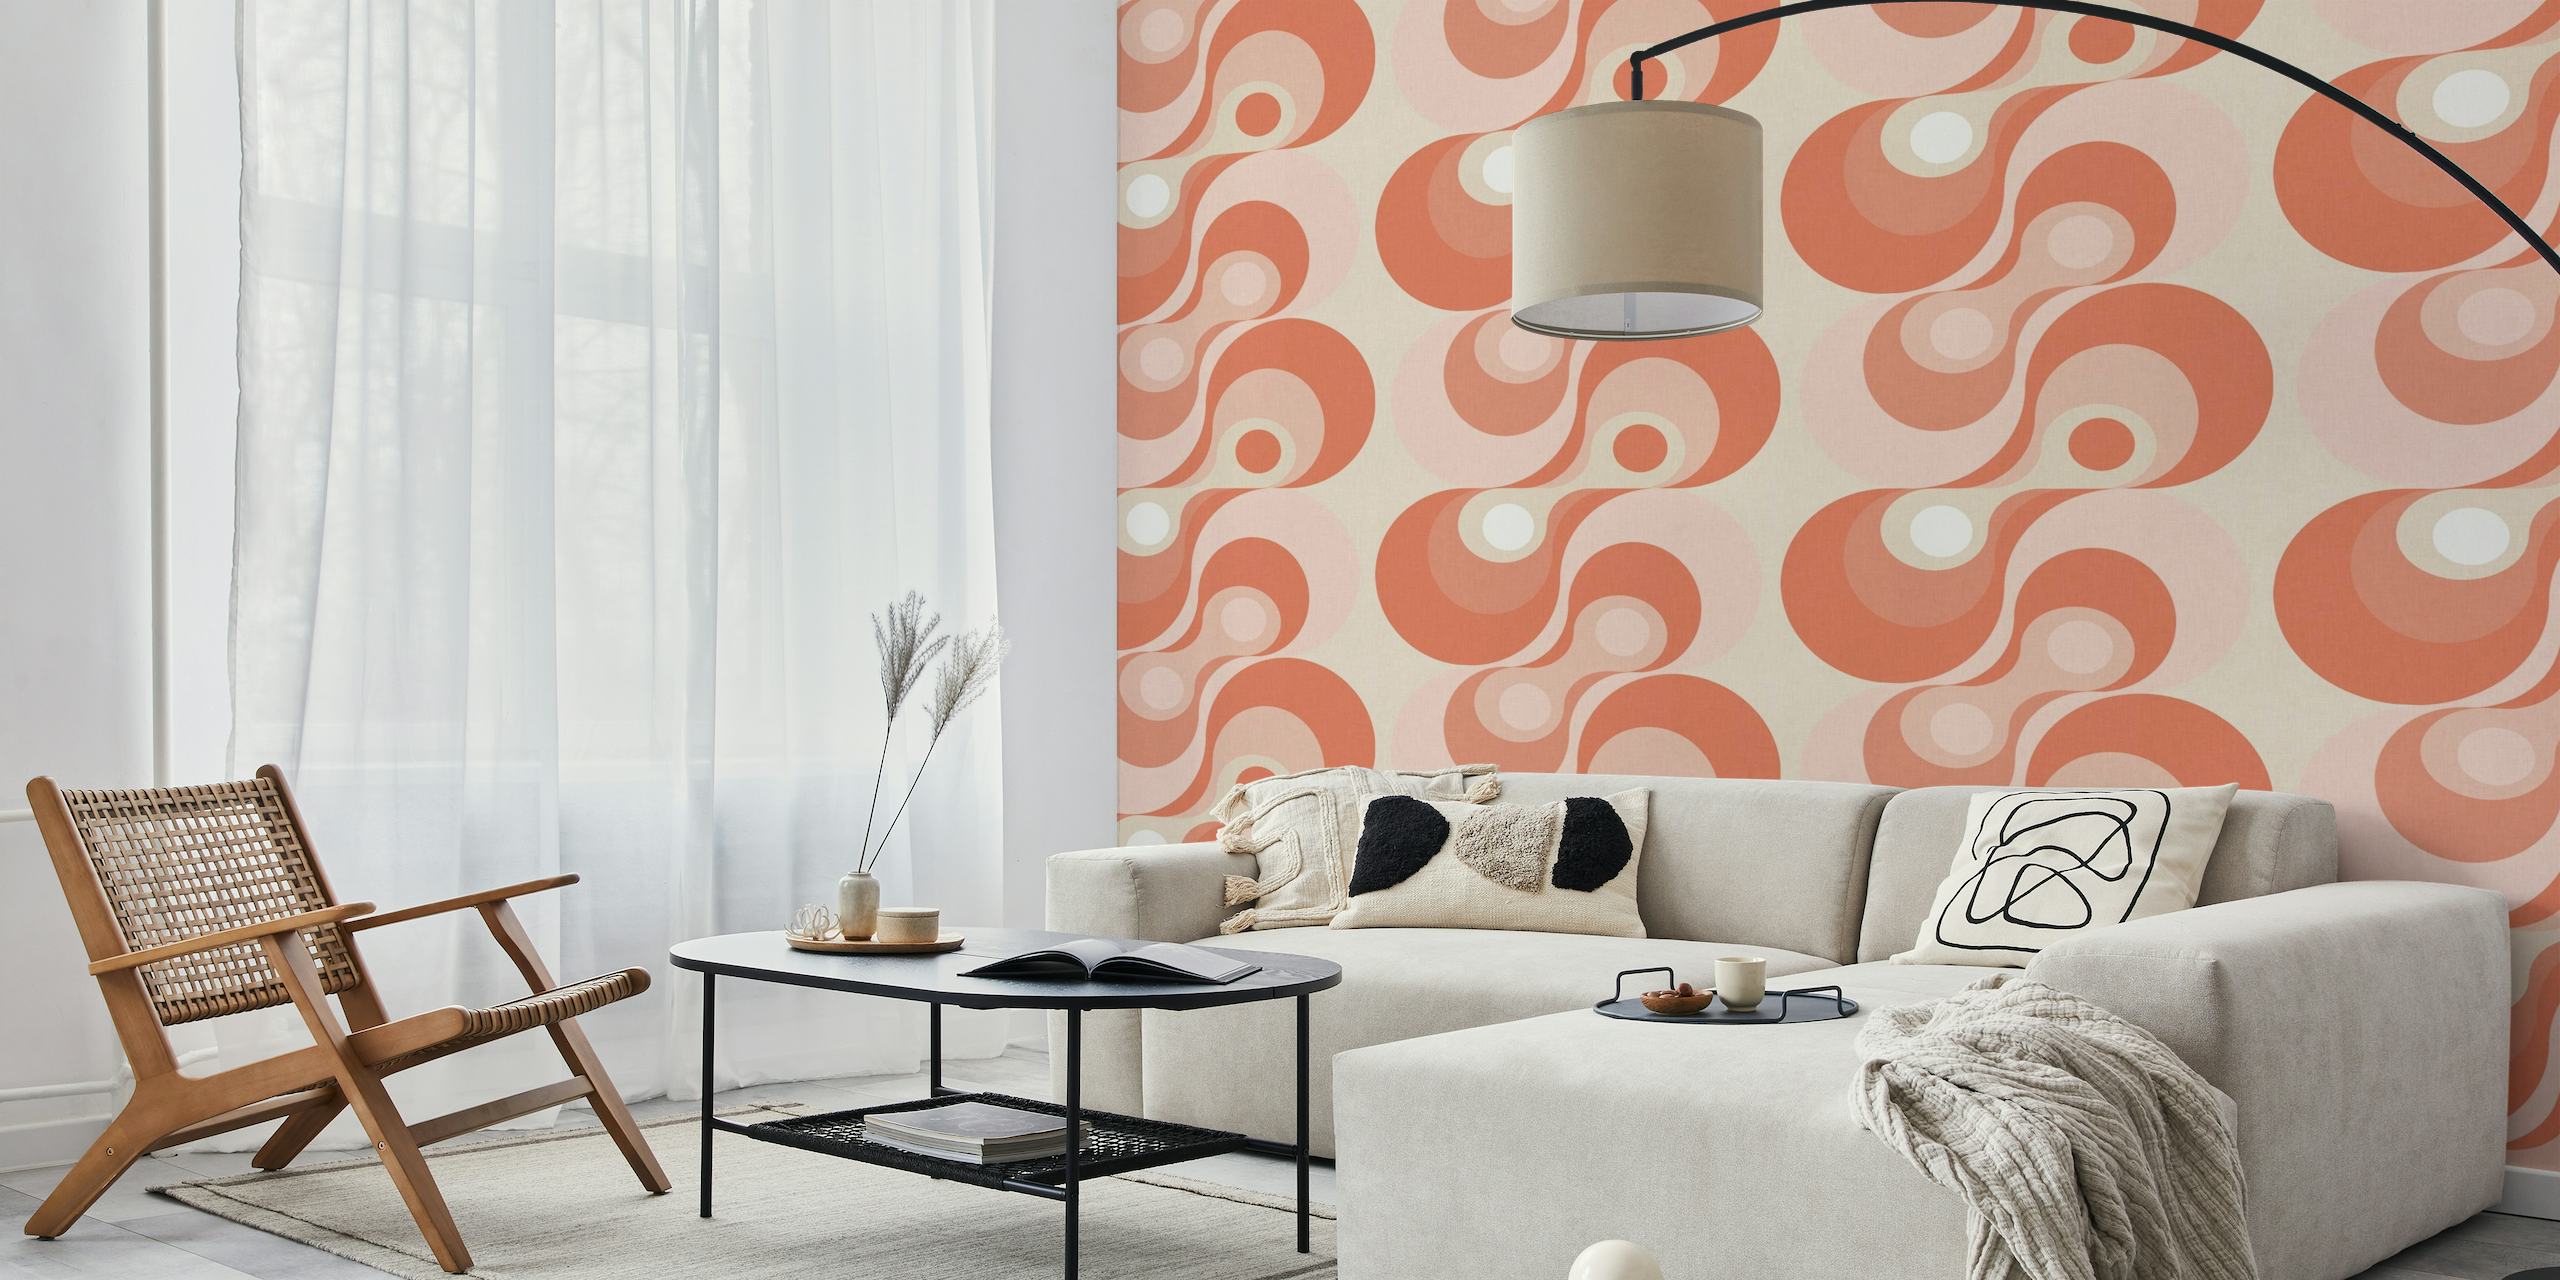 Mid-century modern style wall mural featuring curves and swirls in a warm color scheme